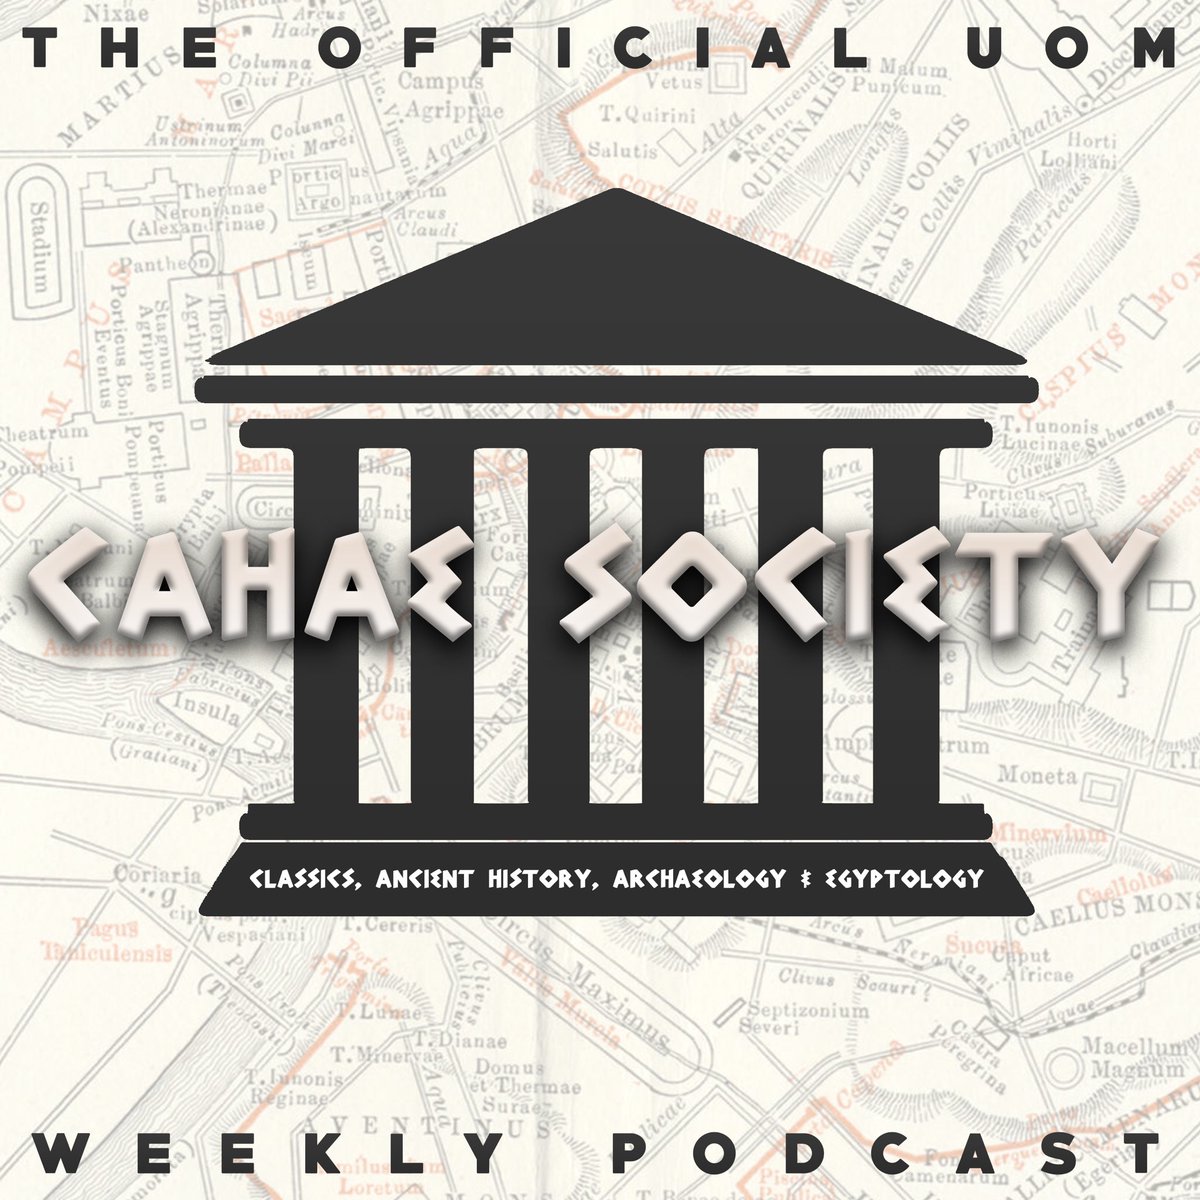 THREAD: The UOM CAHAE Podcast is coming soon!⠀⠀⠀The podcast will be hosted by members of the society and feature two different series